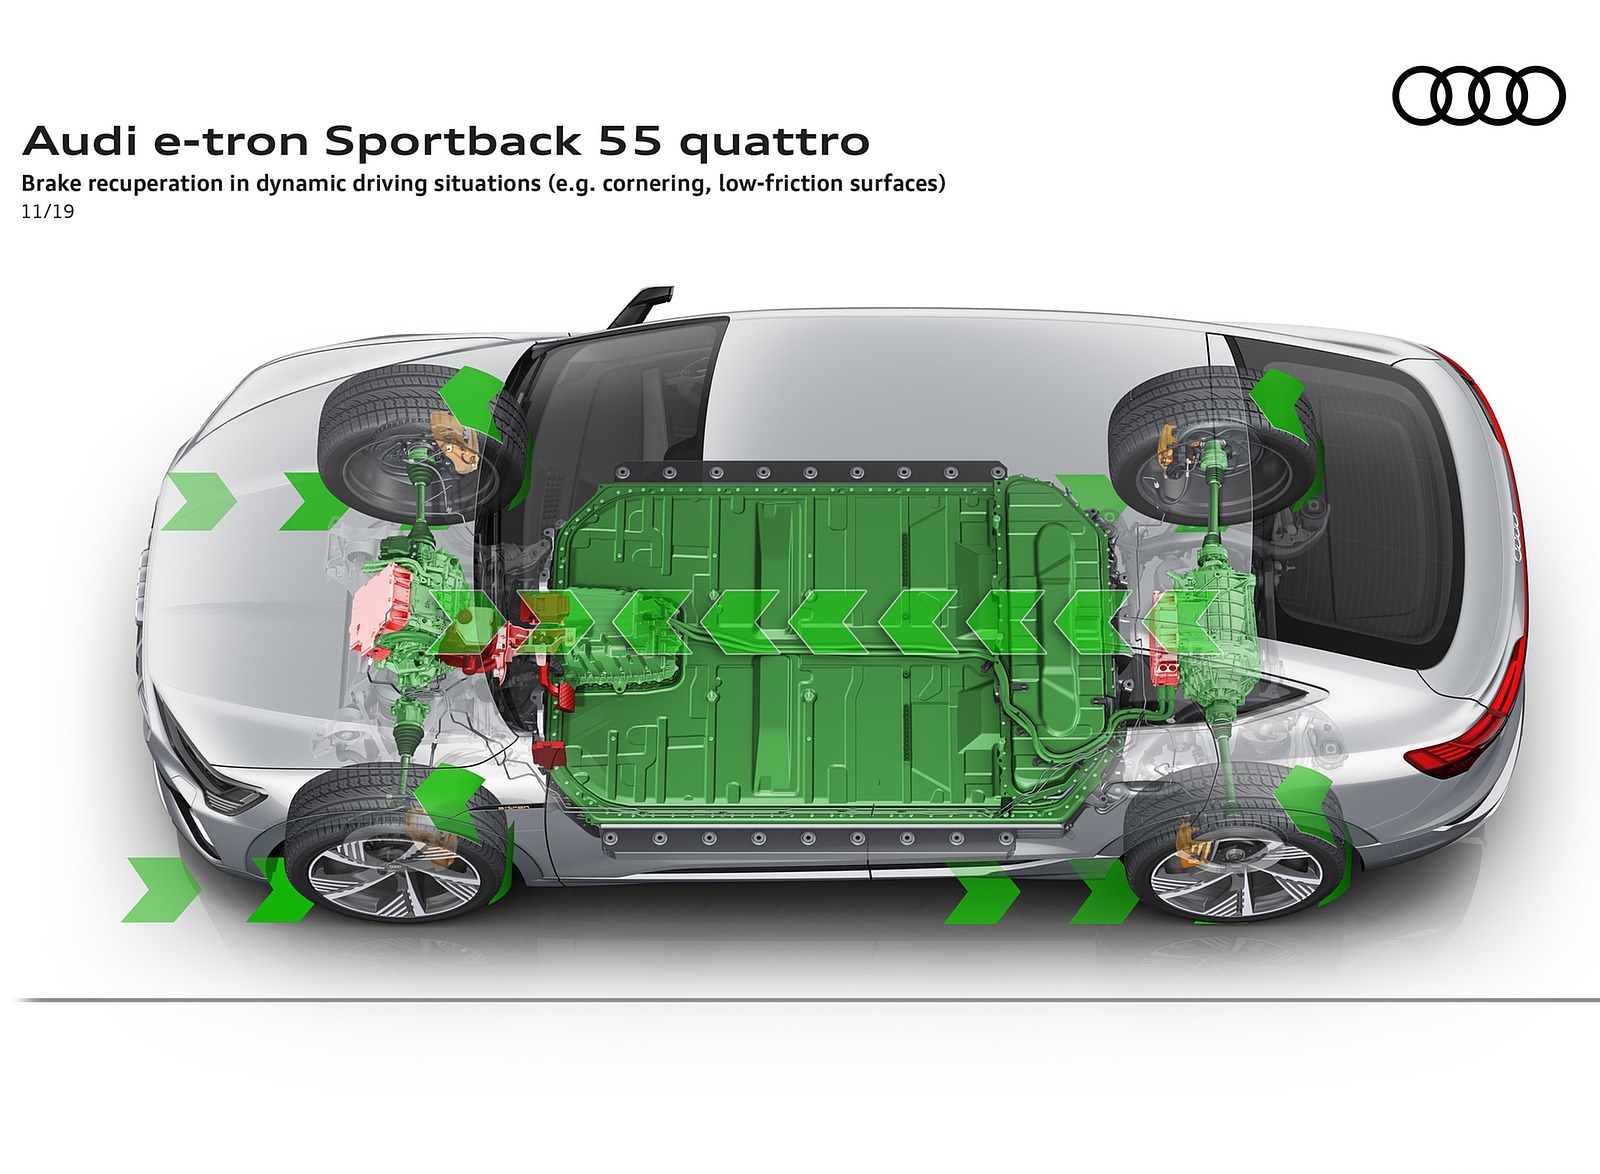 2020 Audi e-tron Sportback Brake recuperation in dynamic driving situations (e.g. cornering low-friction surfaces) Wallpapers #116 of 145